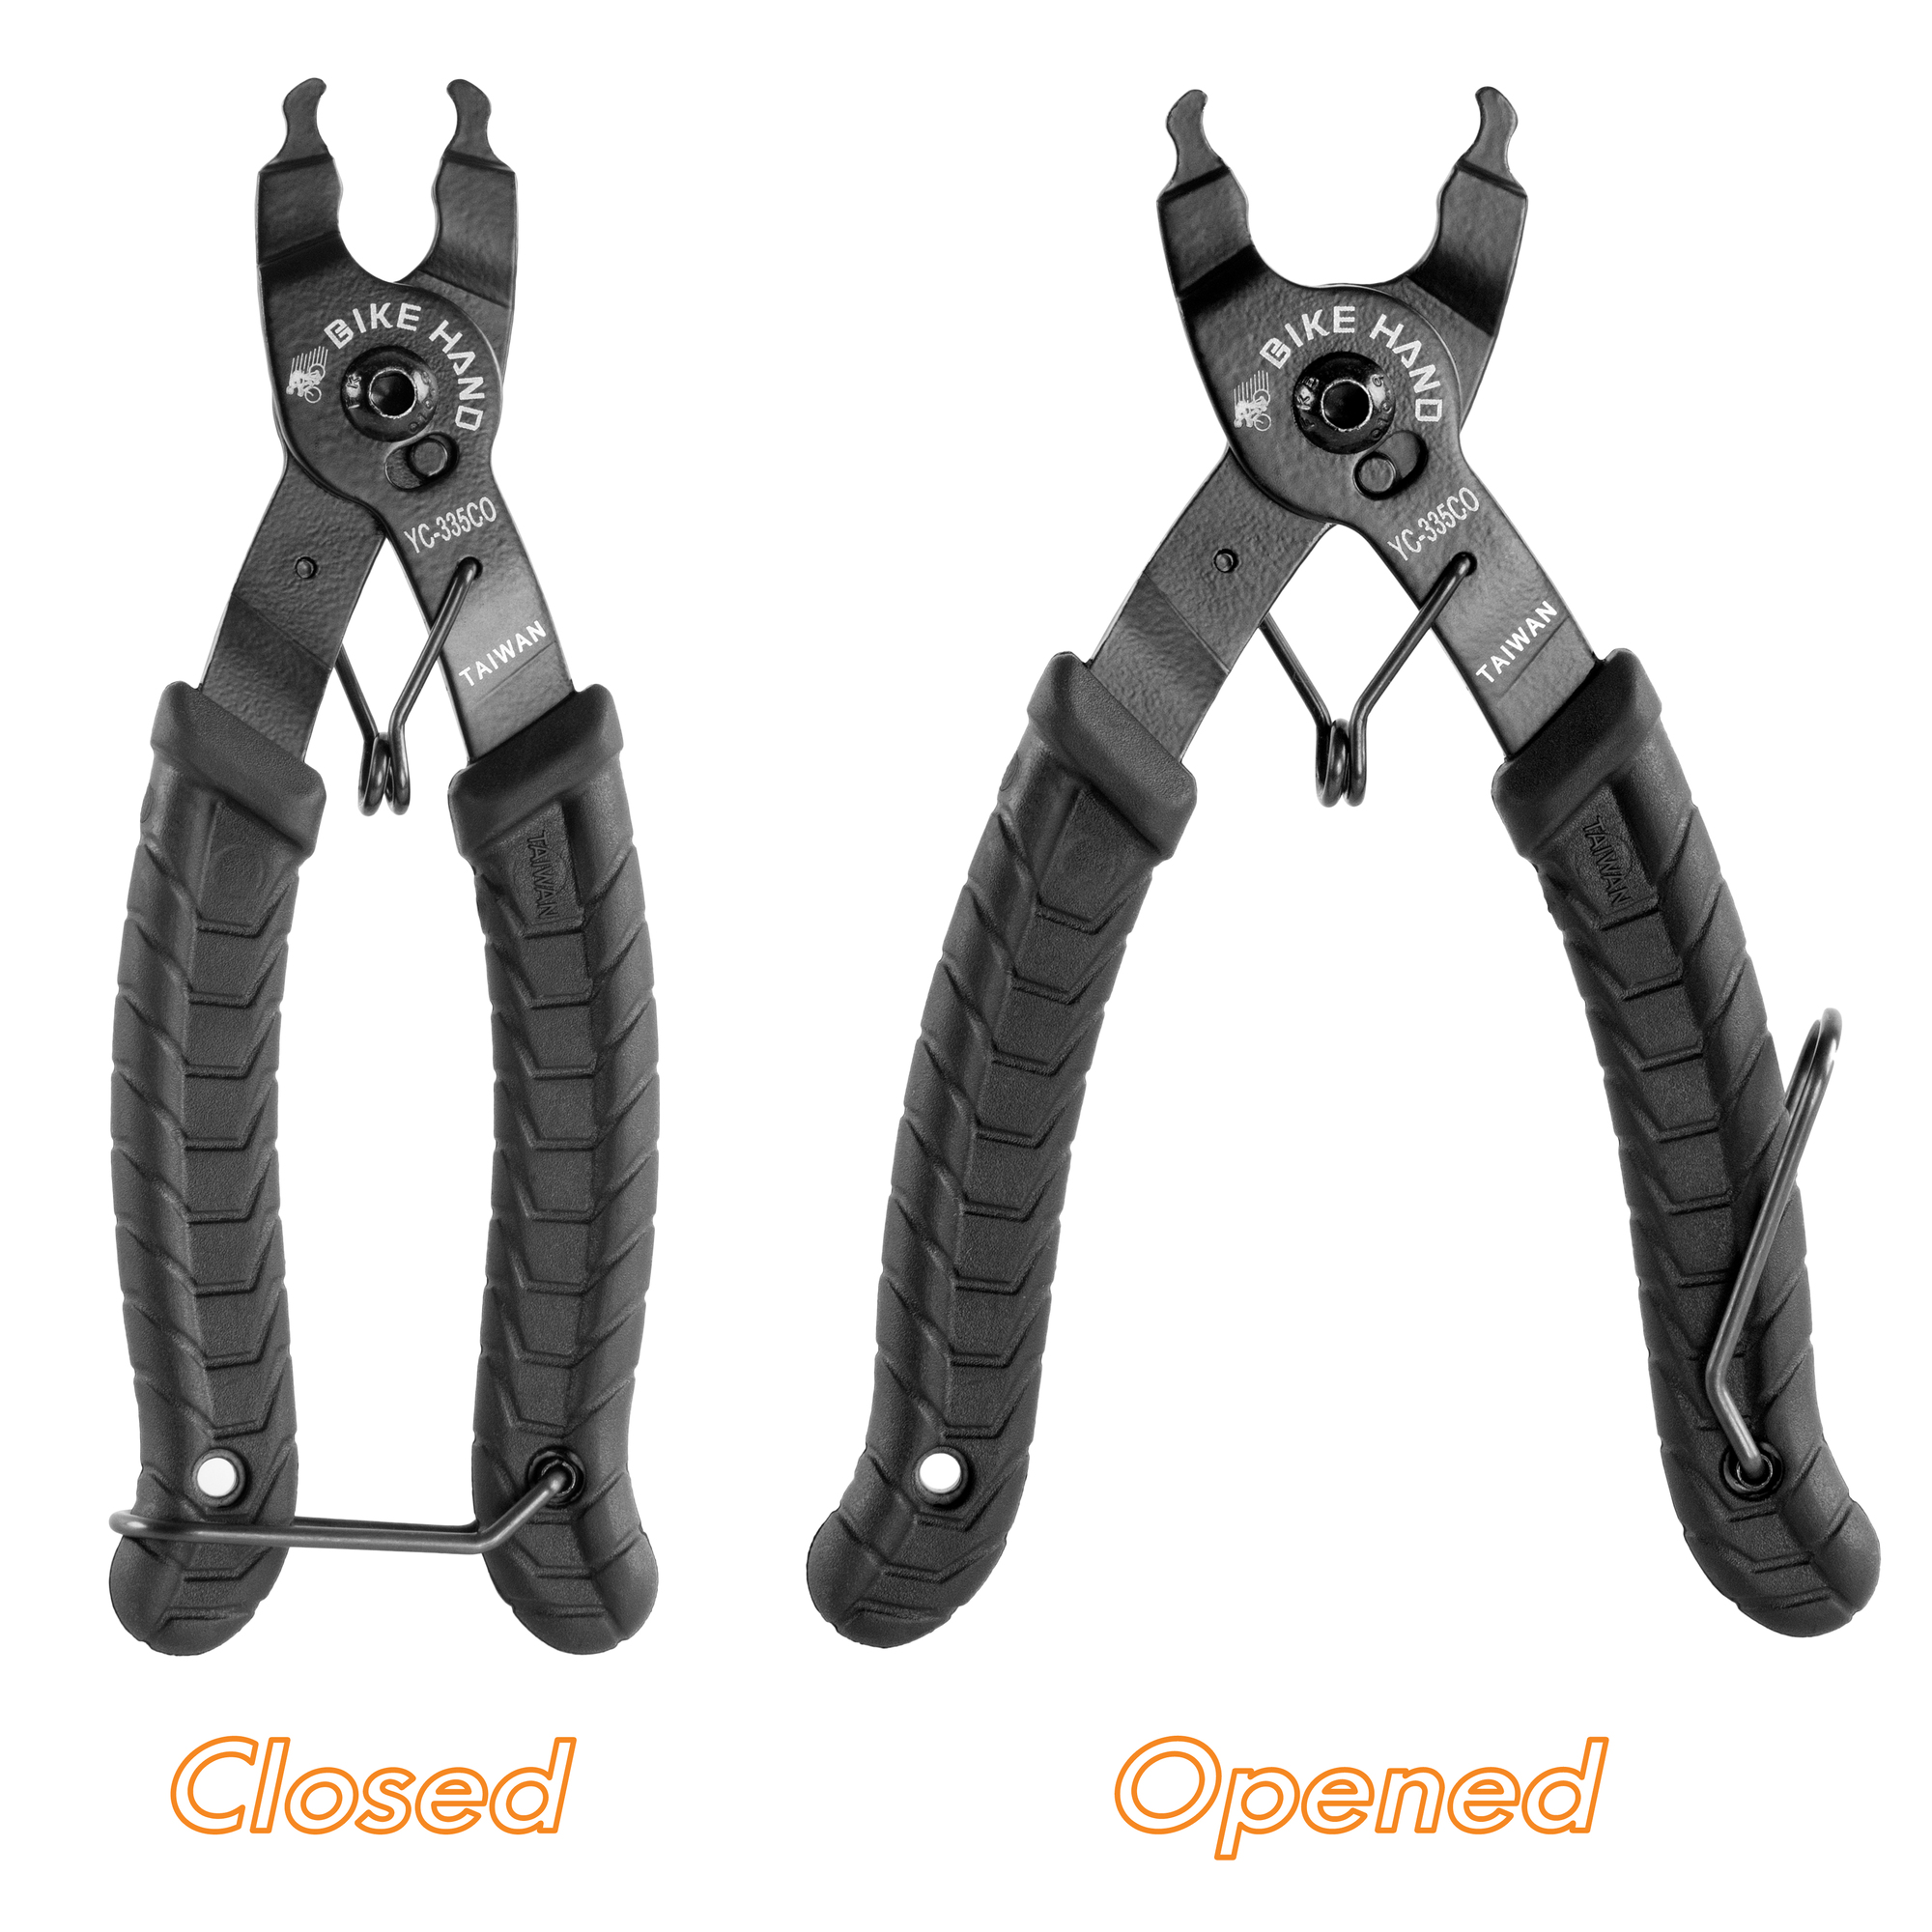 Bike missing link pliers Bicycle Chain Quick Link Open master link Tool 